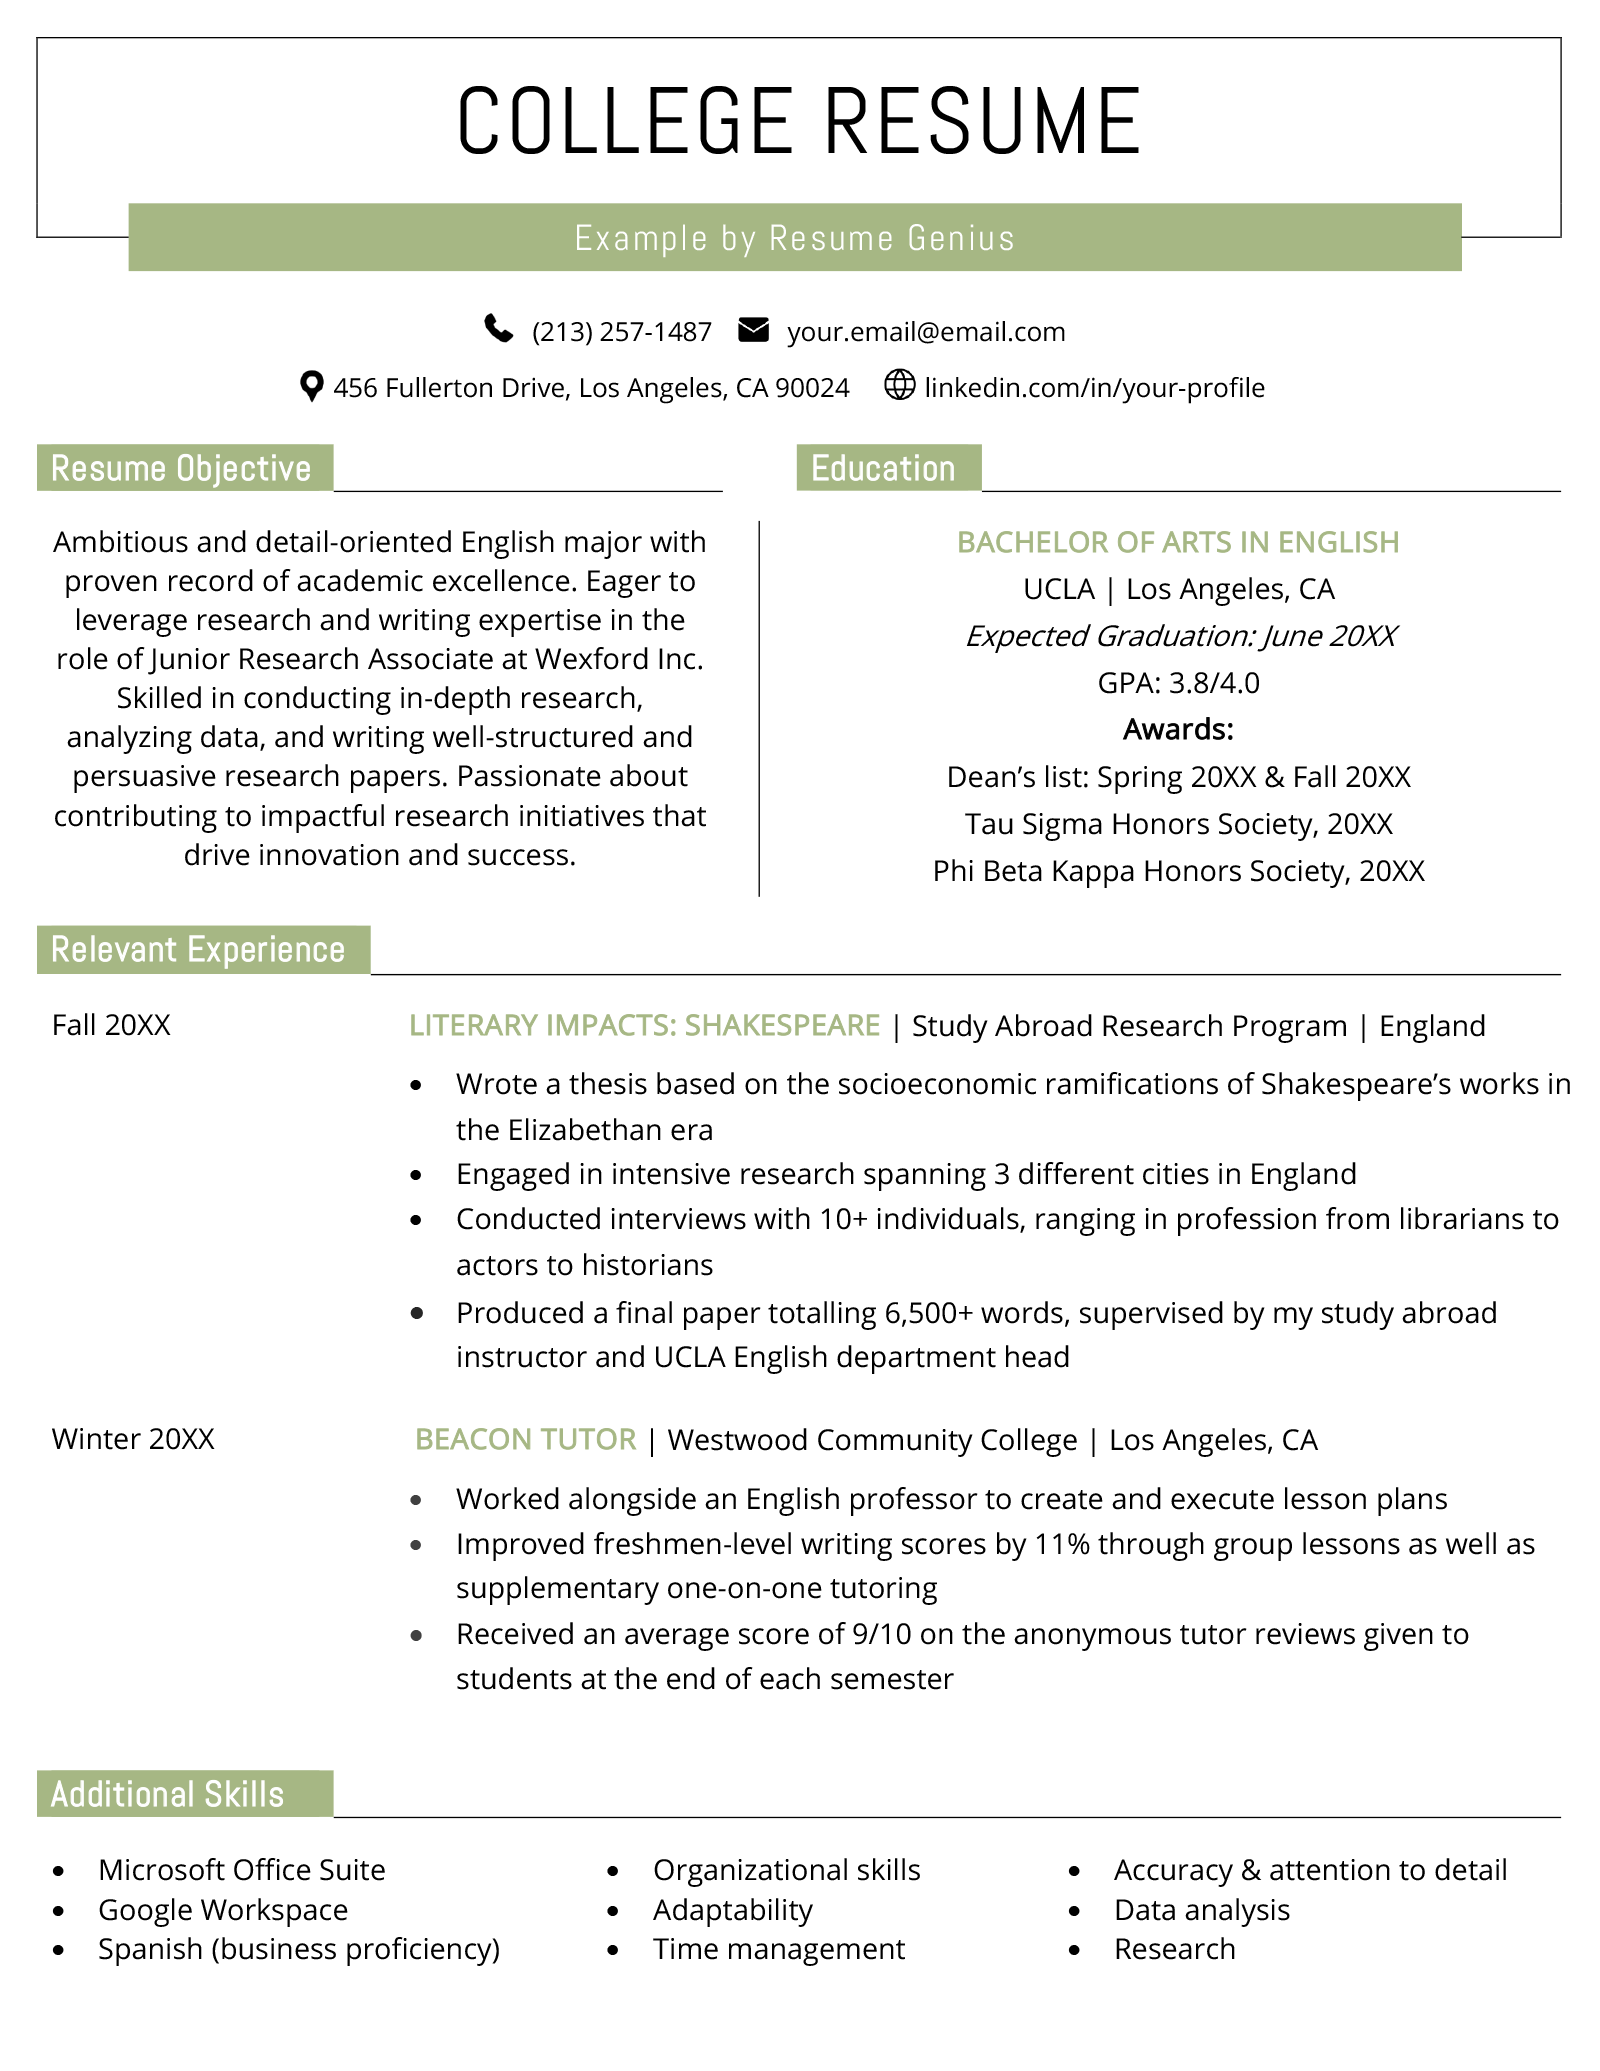 Example of a college student's resume, with a simple green design and two columned layout.